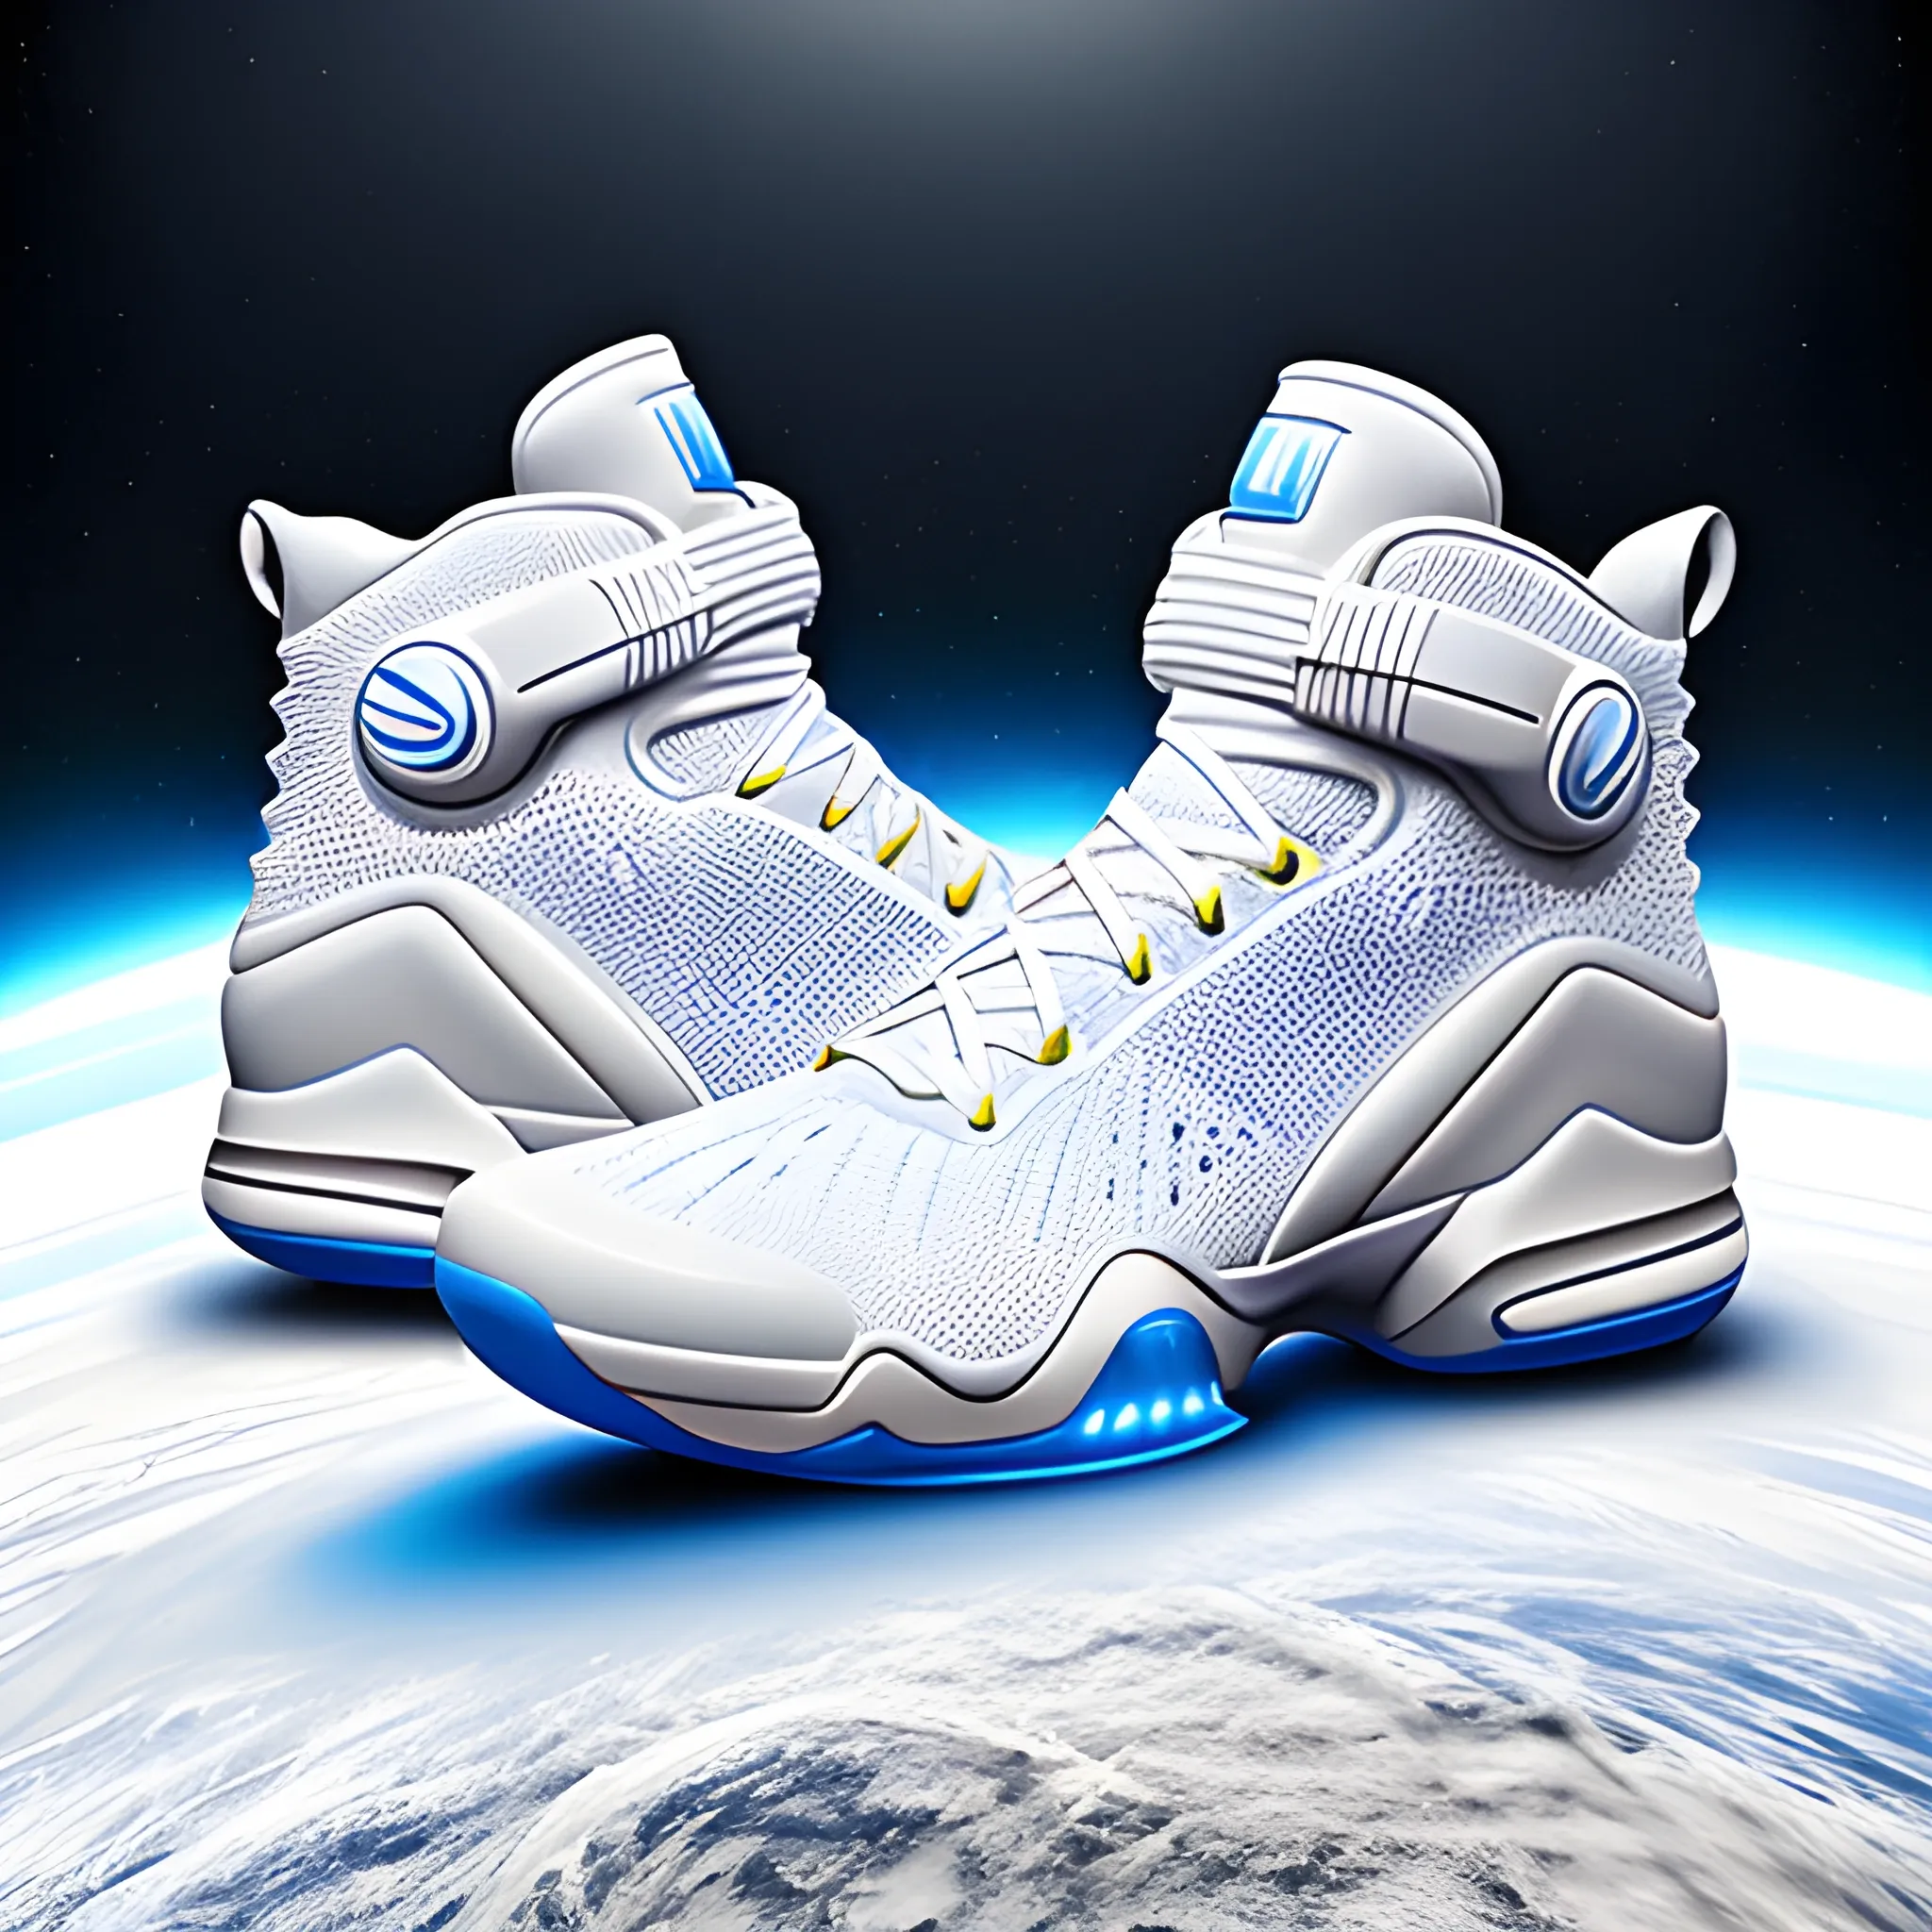 Surreal detailed basketball shoe product photo with spacesuit elements, Michelin baby elements, light feeling, full milky white design, pop in art station, smooth, whole shoe in picture, sharp focus